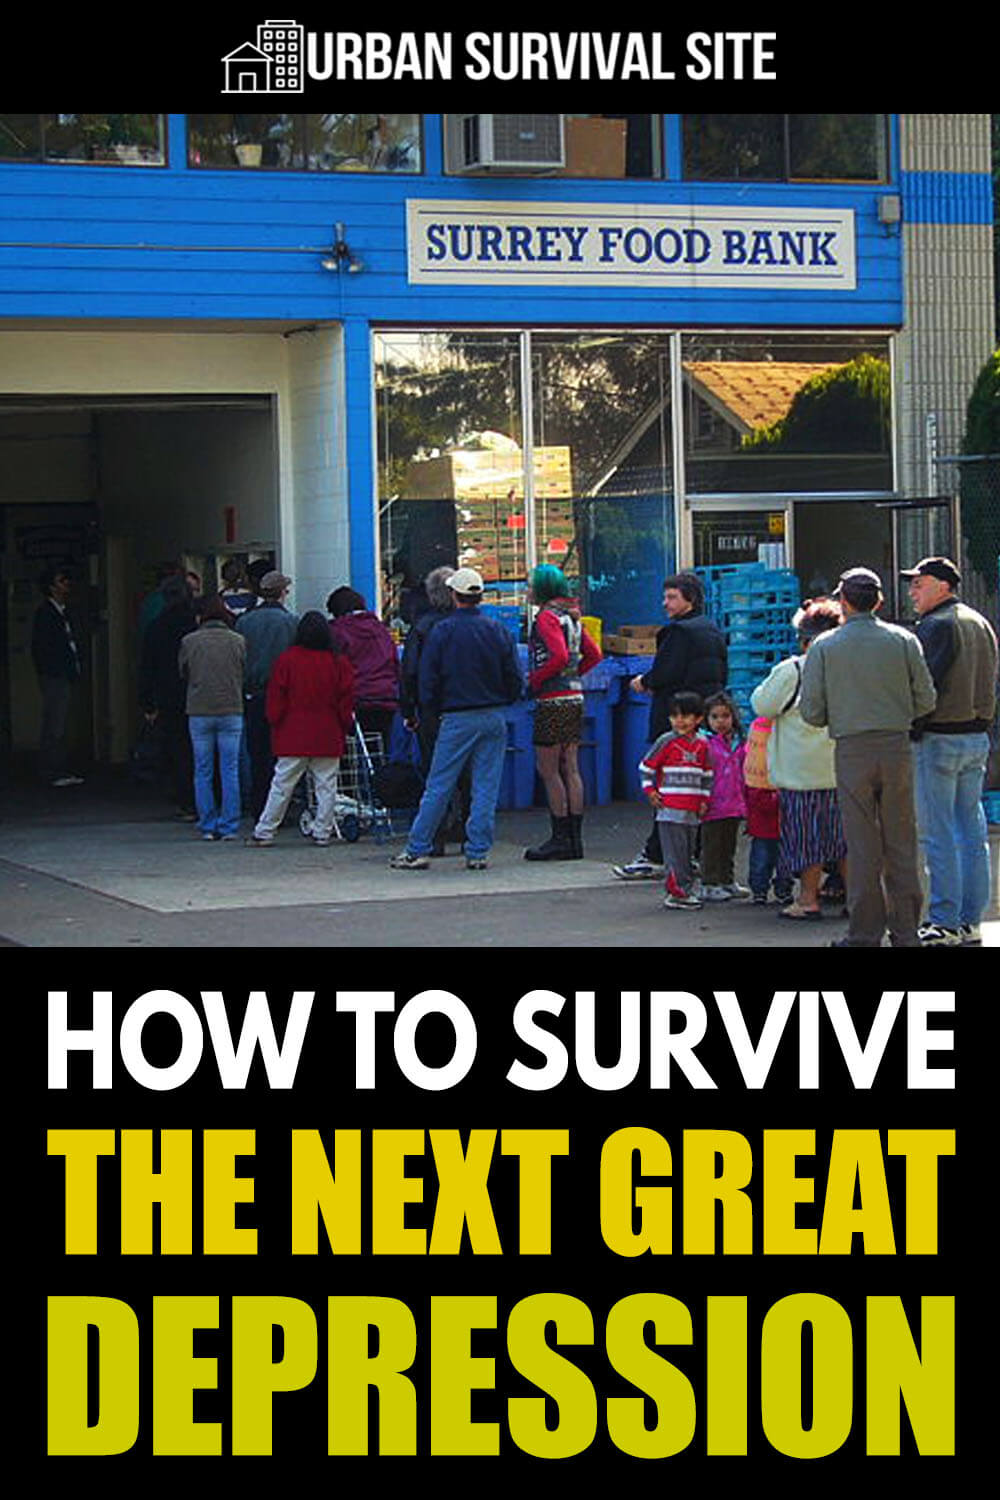 How to Survive The Next Great Depression